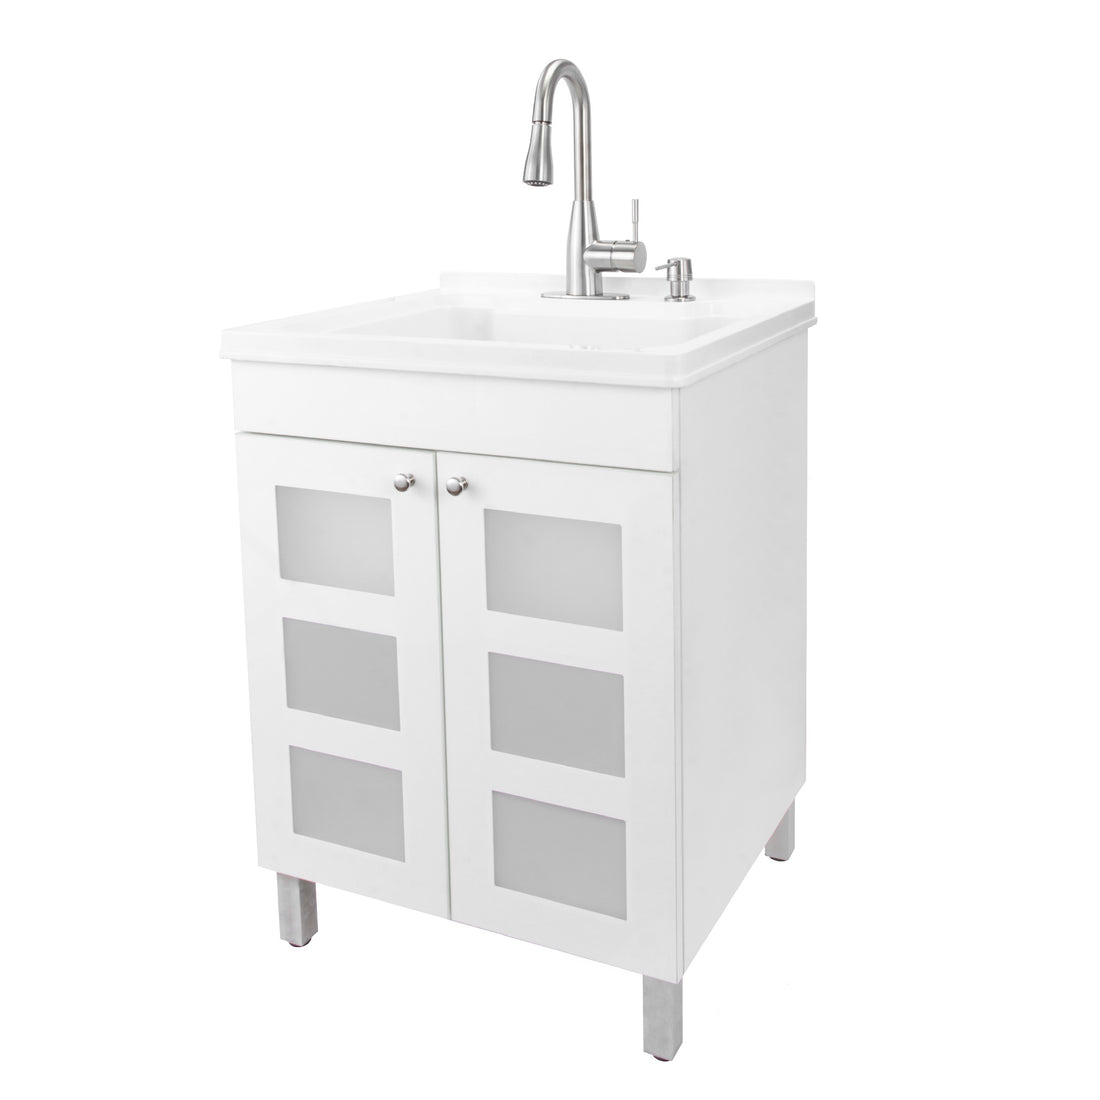 Tehila White Vanity Cabinet and White Utility Sink with Stainless Steel Finish Low-Profile Pull-Down Faucet - Utility sinks vanites Tehila